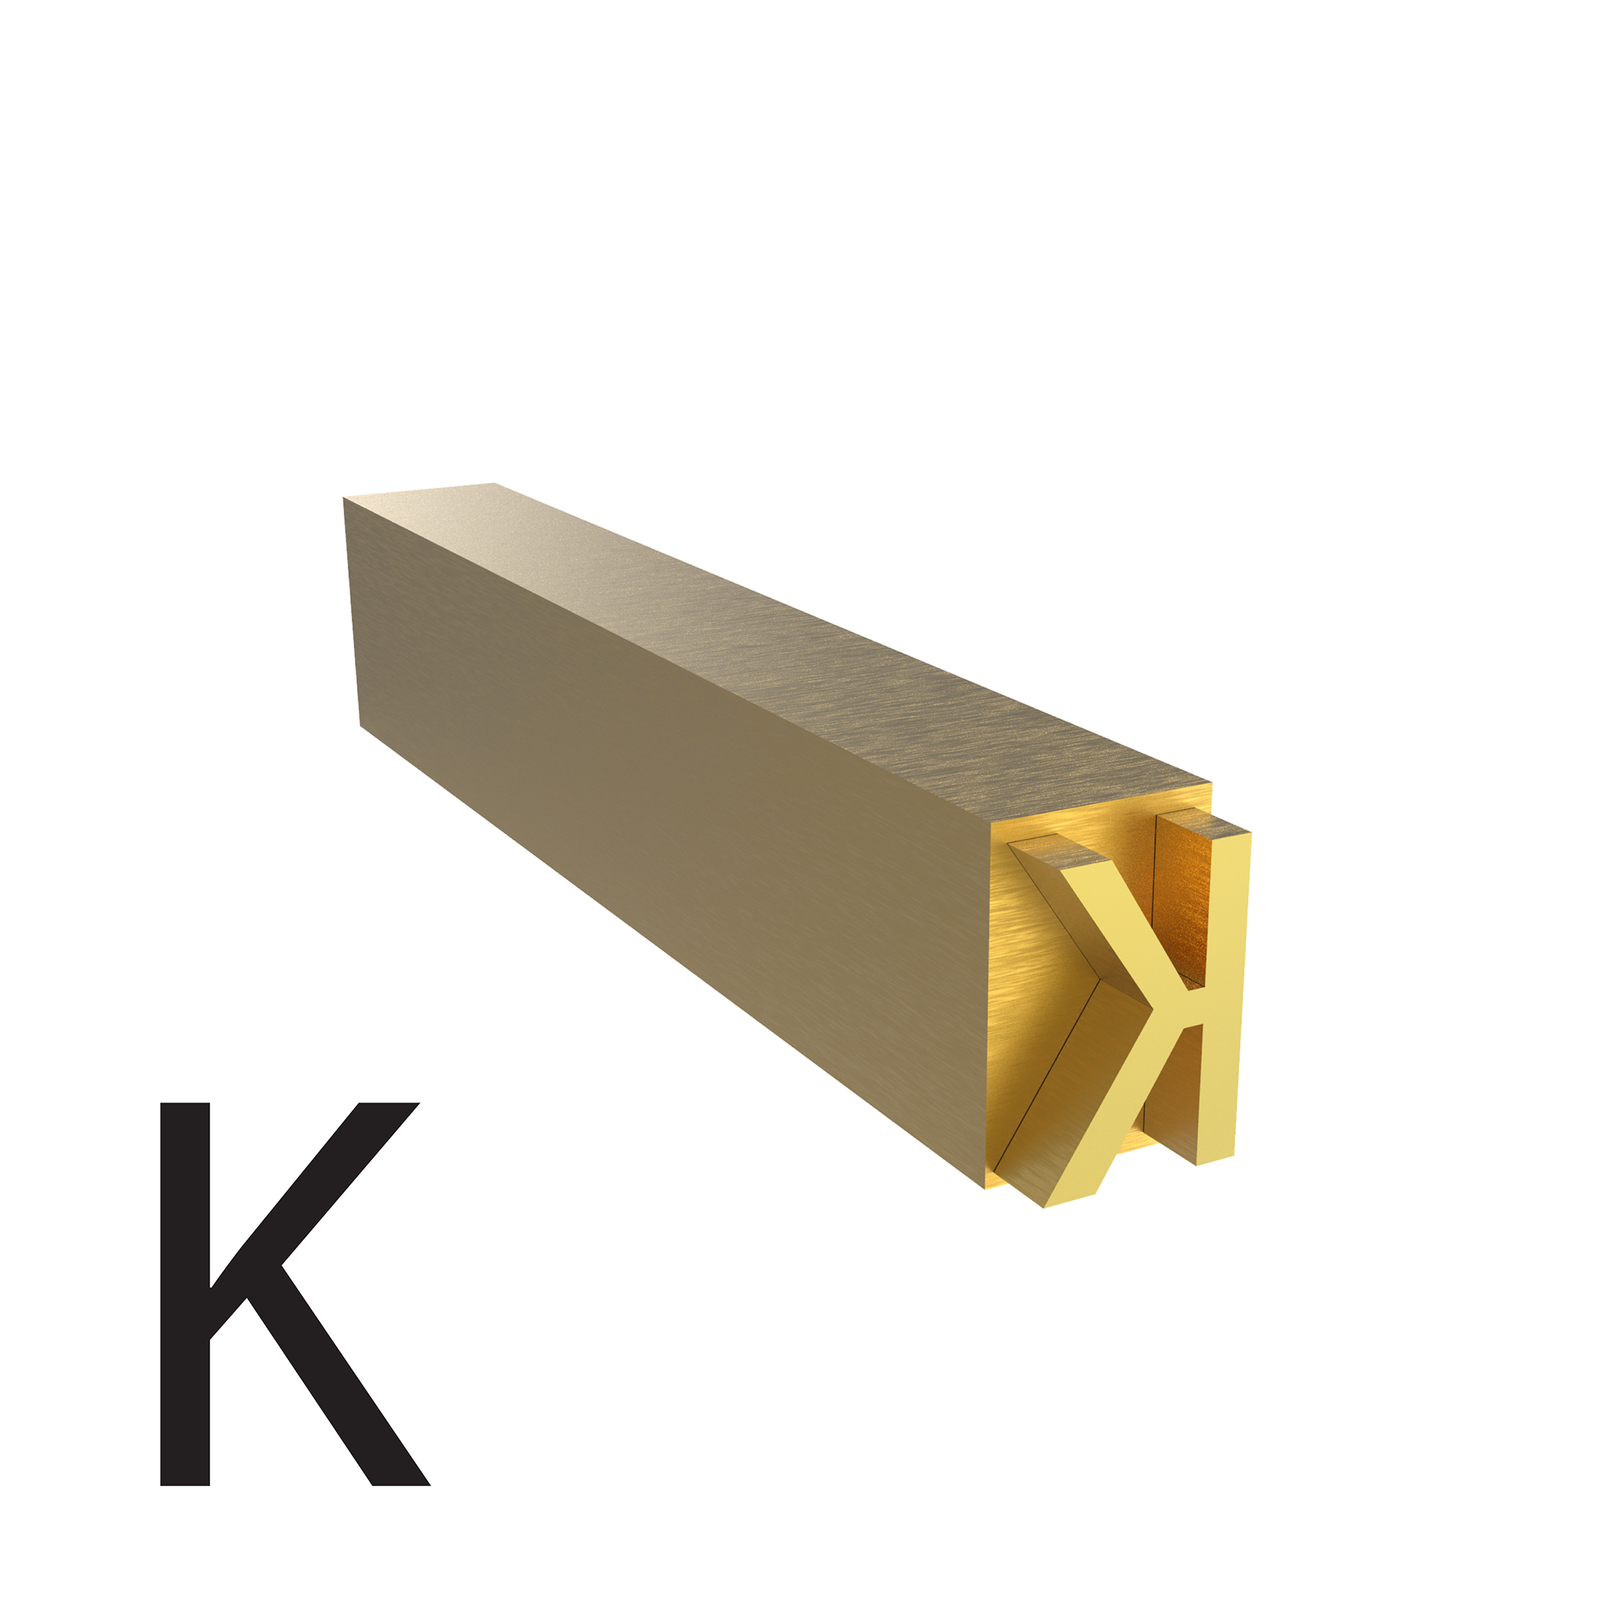 4mm hot stamp letter K type used for coders and printers